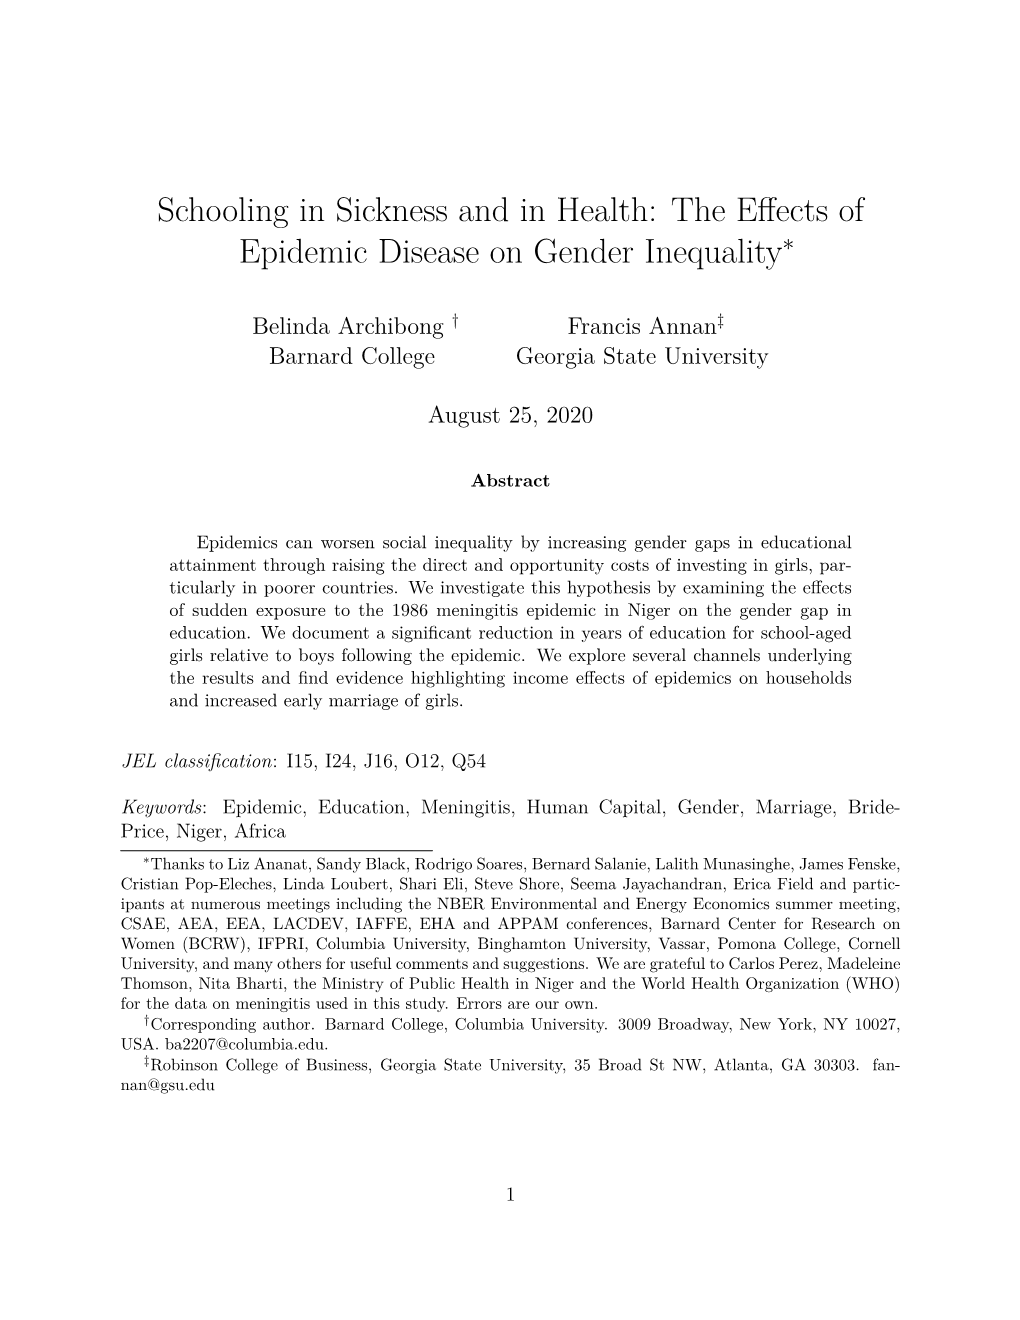 Schooling in Sickness and in Health: the Effects of Epidemic Disease On